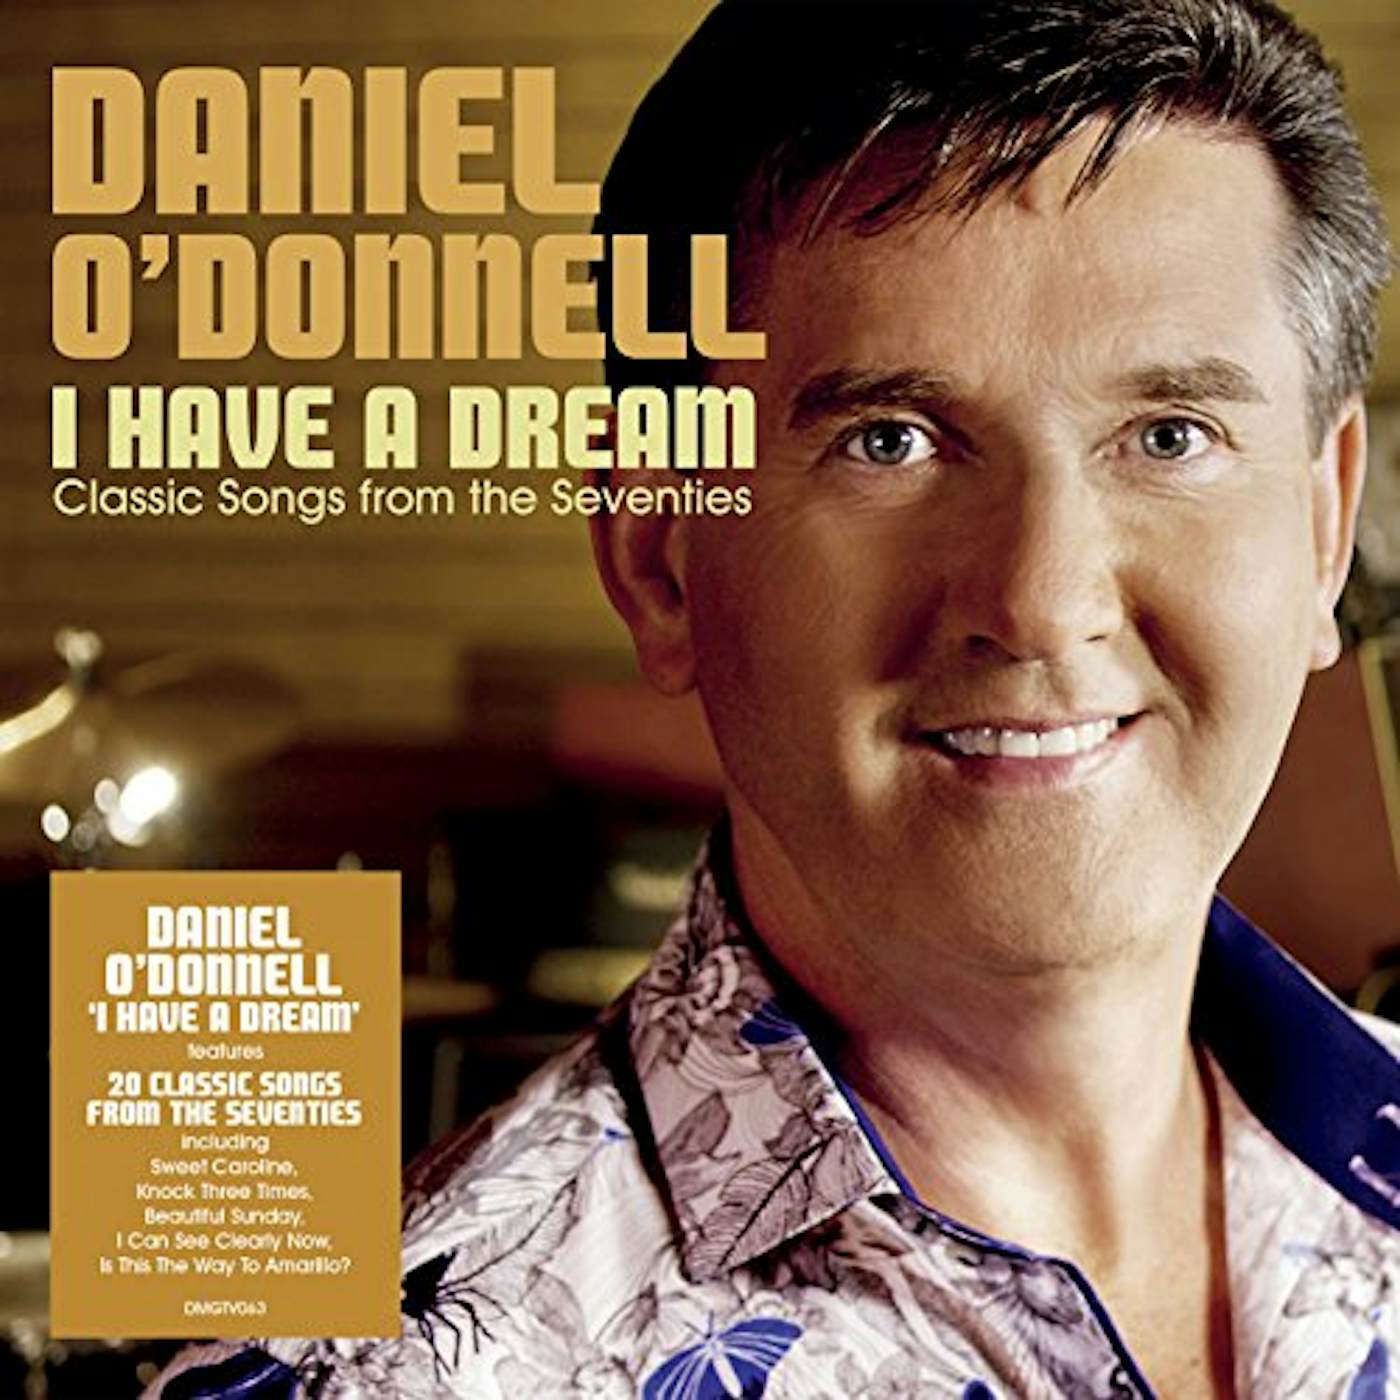 Daniel O'Donnell I HAVE A DREAM CD